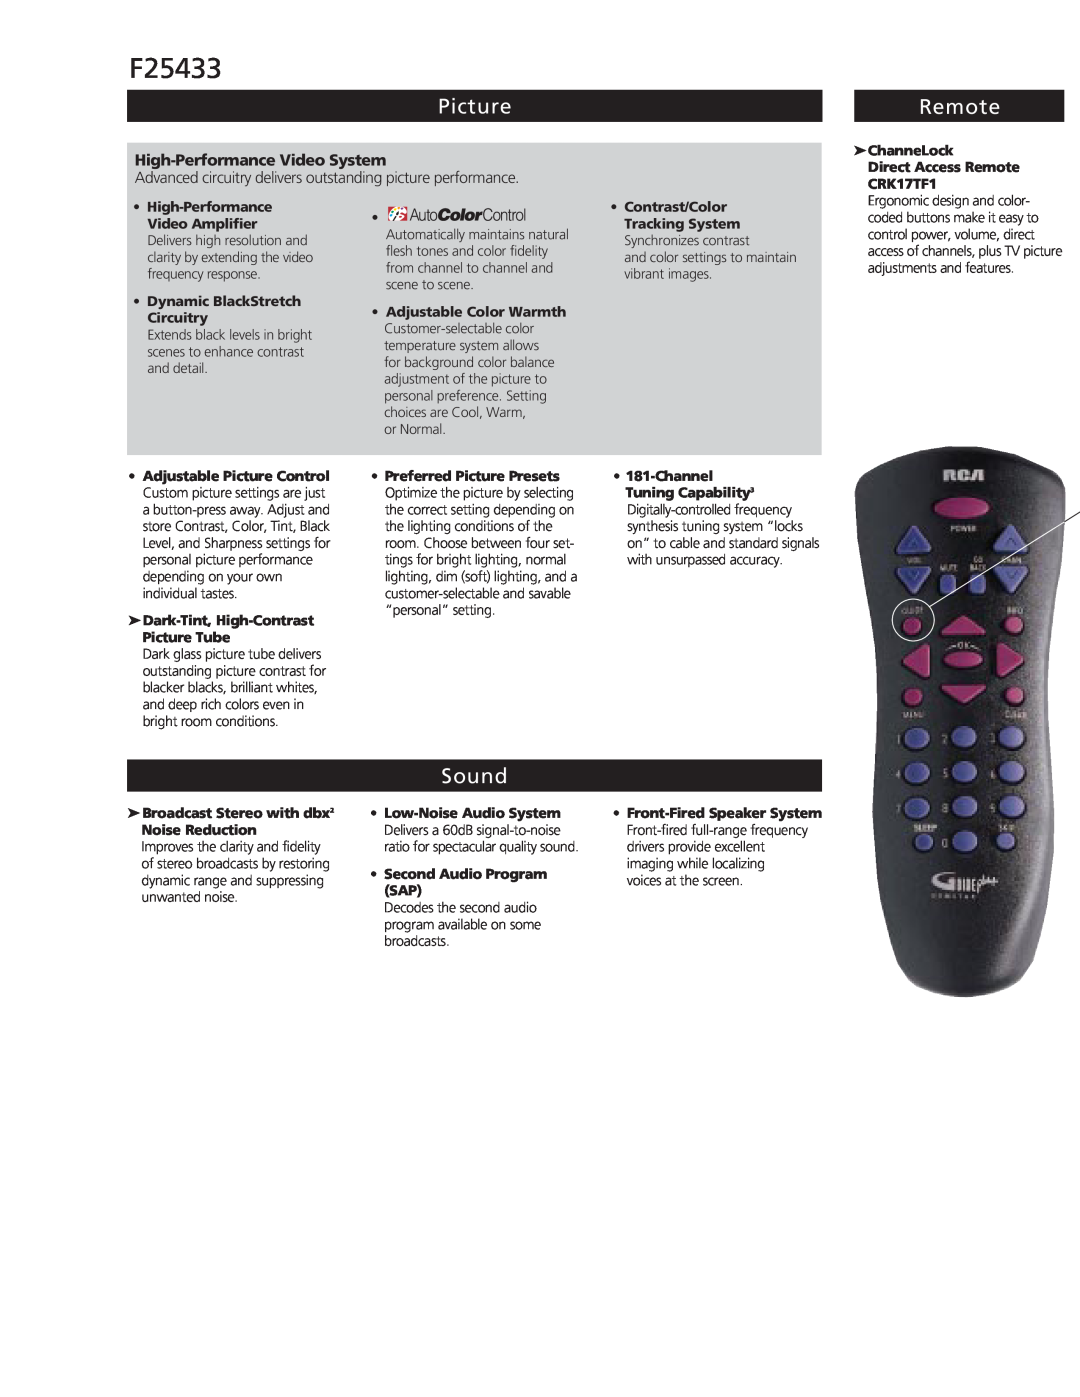 RCA F25433 Picture, Remote, Sound, High-Performance Video System, or Normal, and color settings to maintain vibrant images 